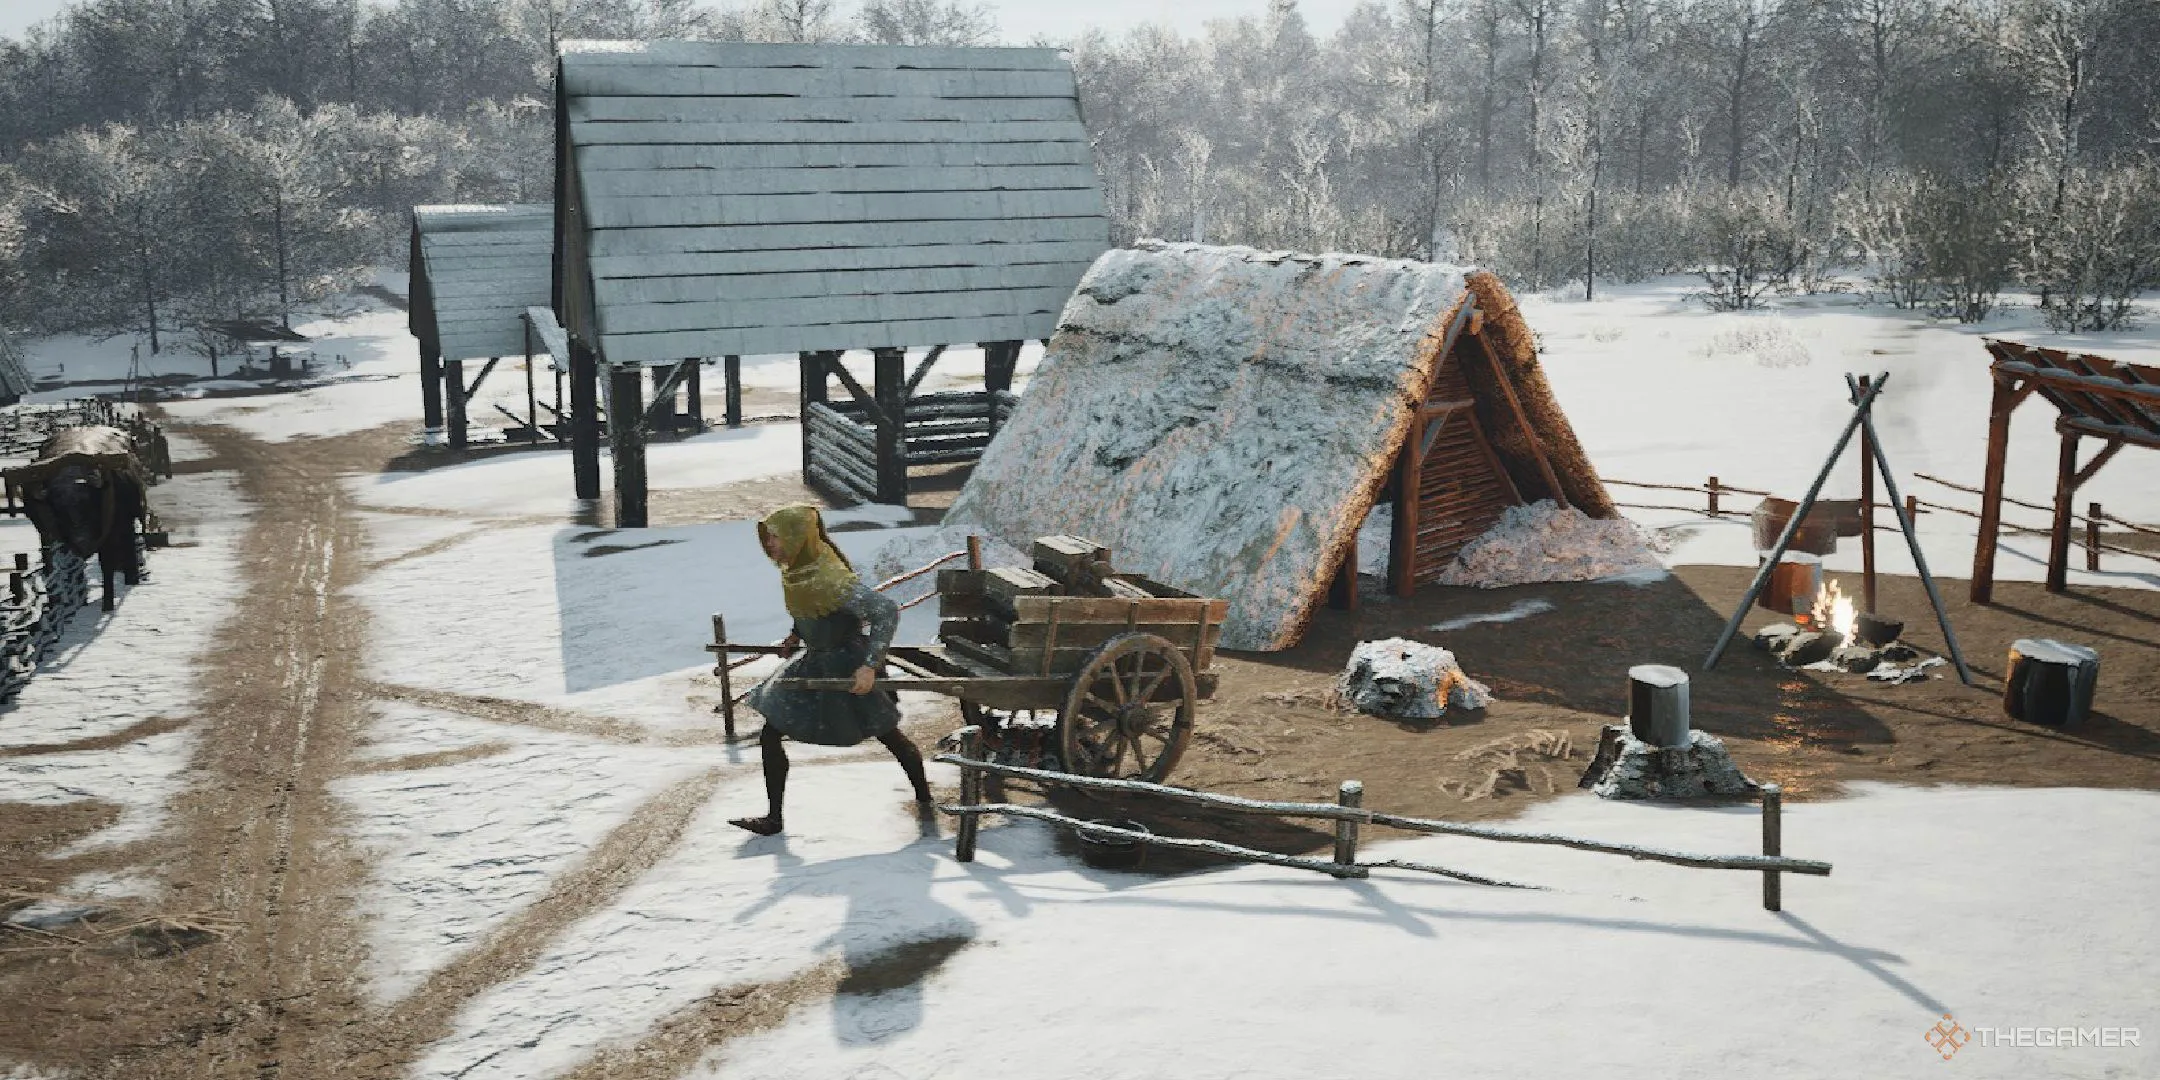 Food and Firewood Carts in Manor Lords